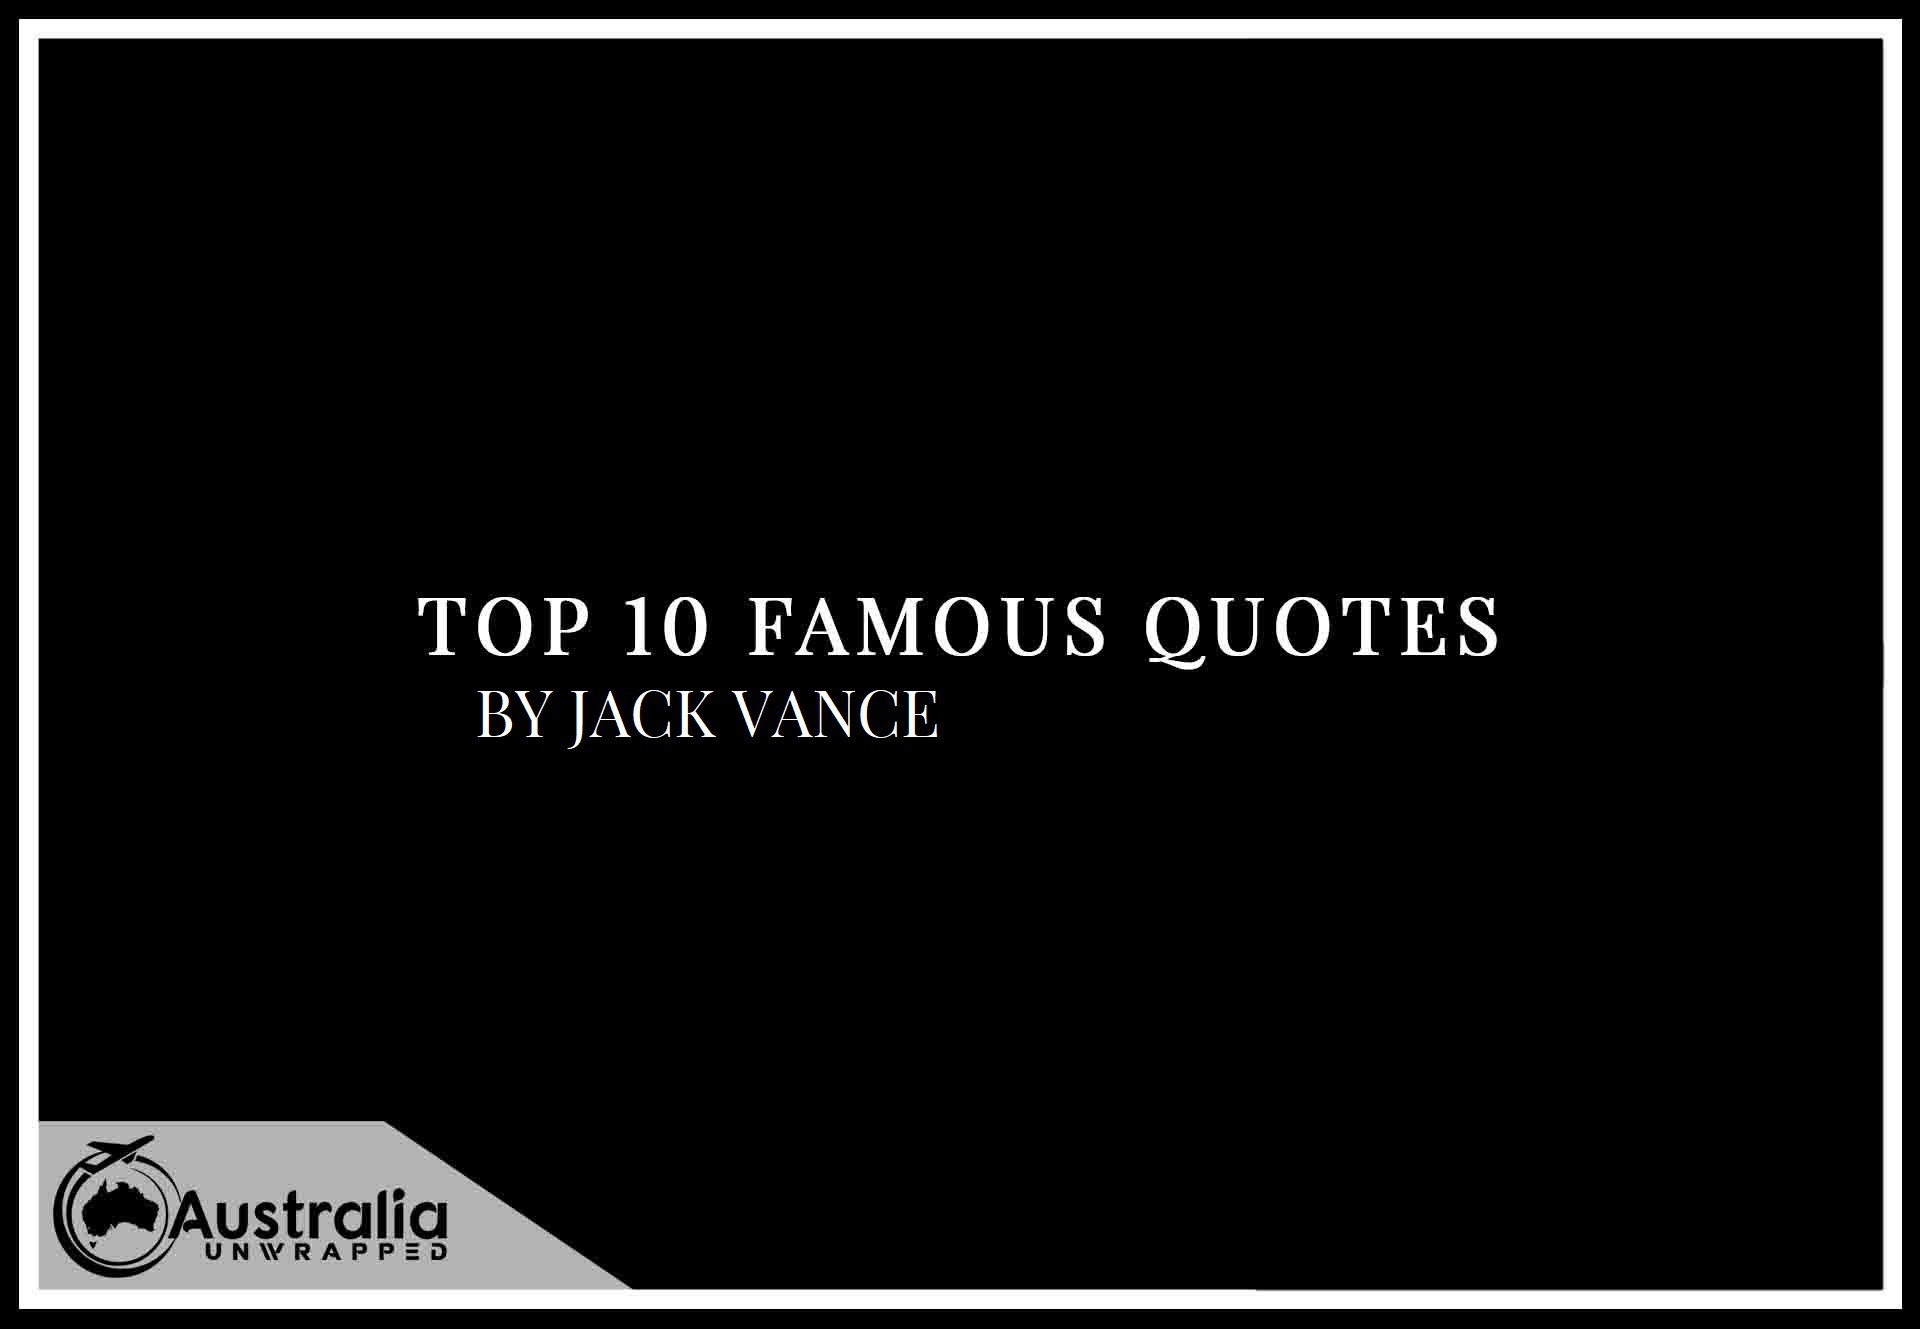 Top 10 Famous Quotes by Author Jack Vance